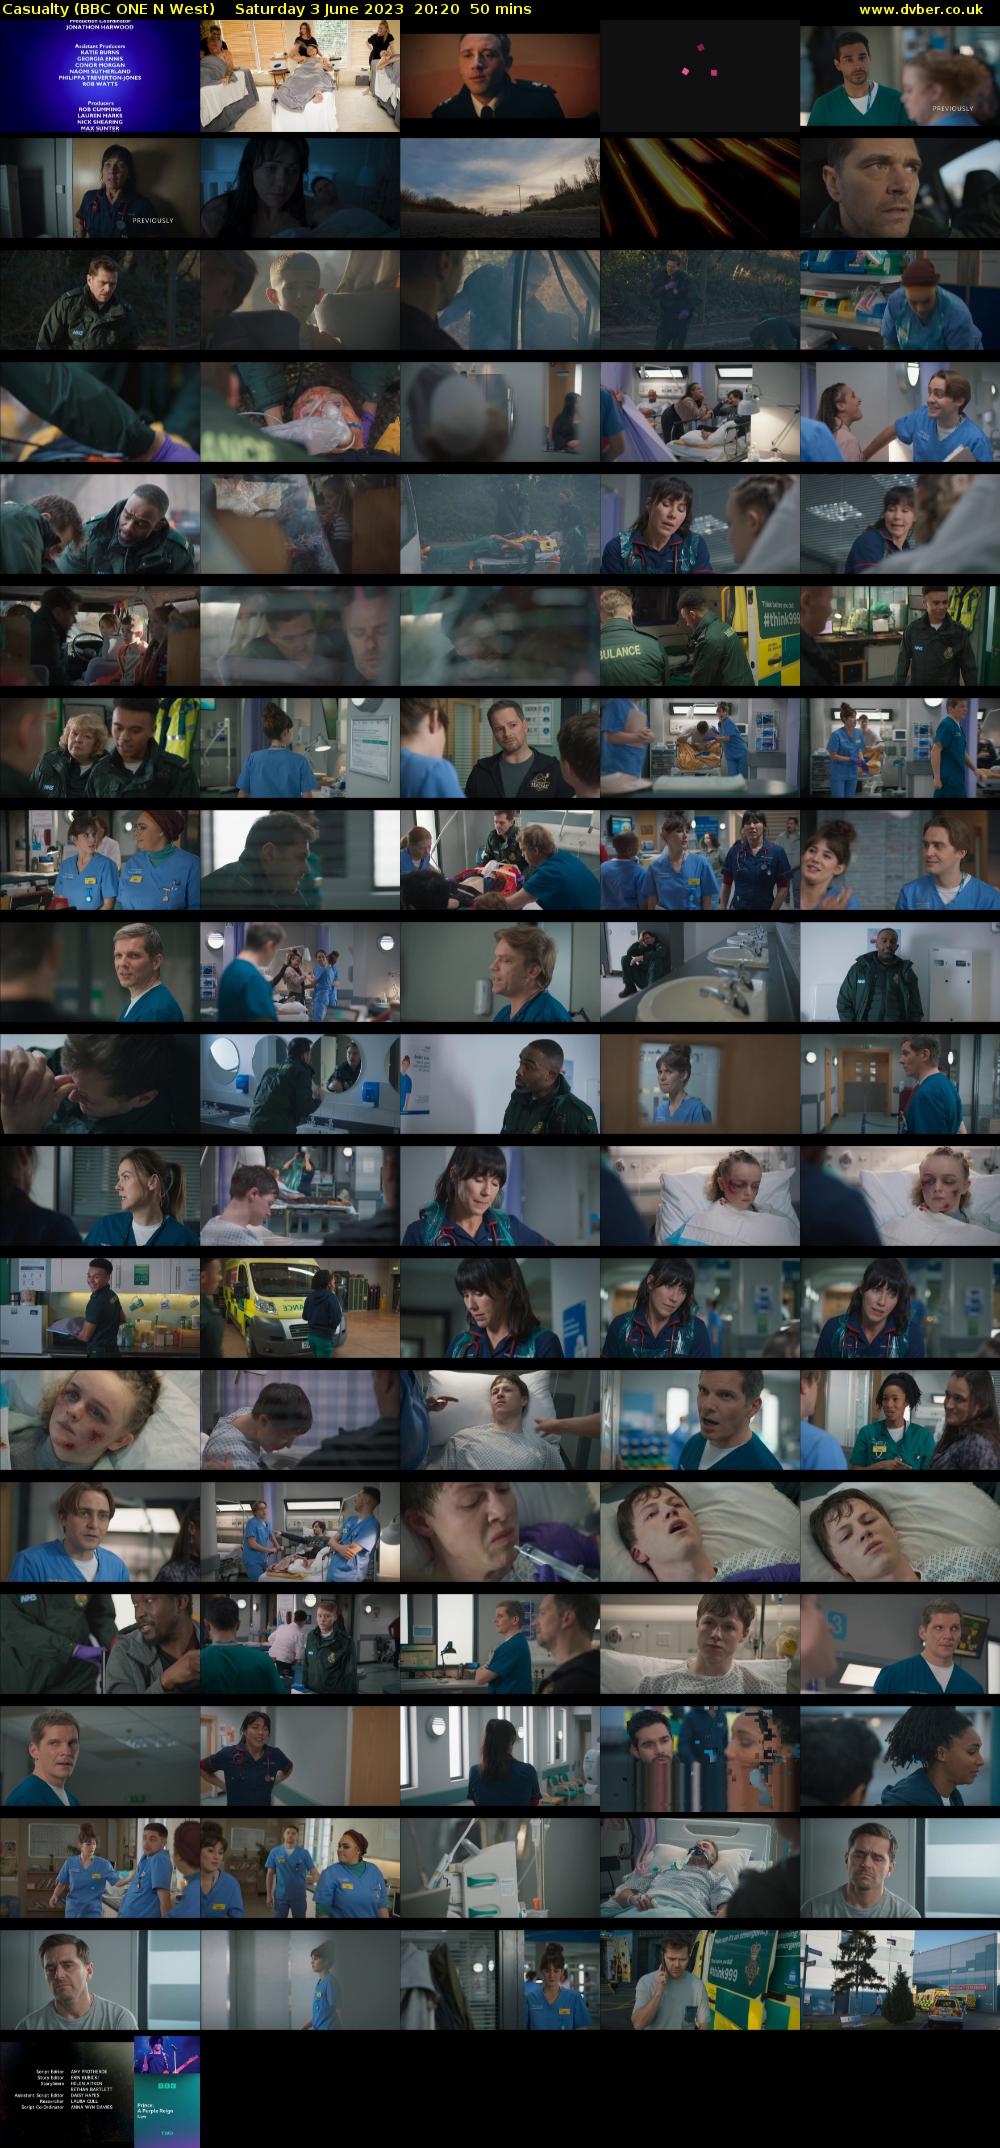 Casualty (BBC ONE N West) Saturday 3 June 2023 20:20 - 21:10